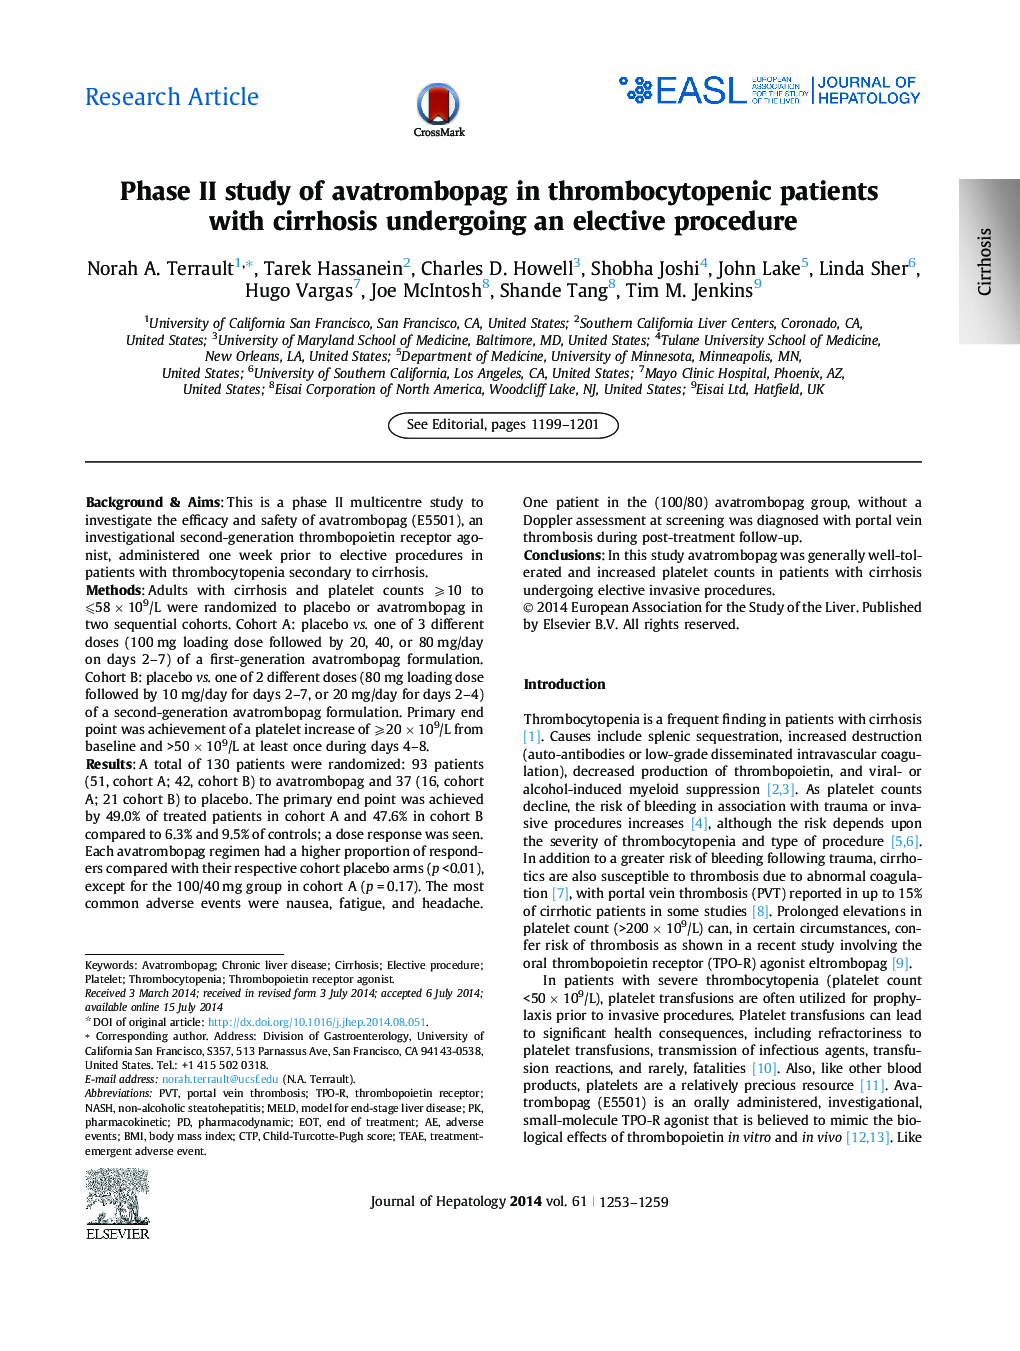 Research ArticlePhase II study of avatrombopag in thrombocytopenic patients with cirrhosis undergoing an elective procedure